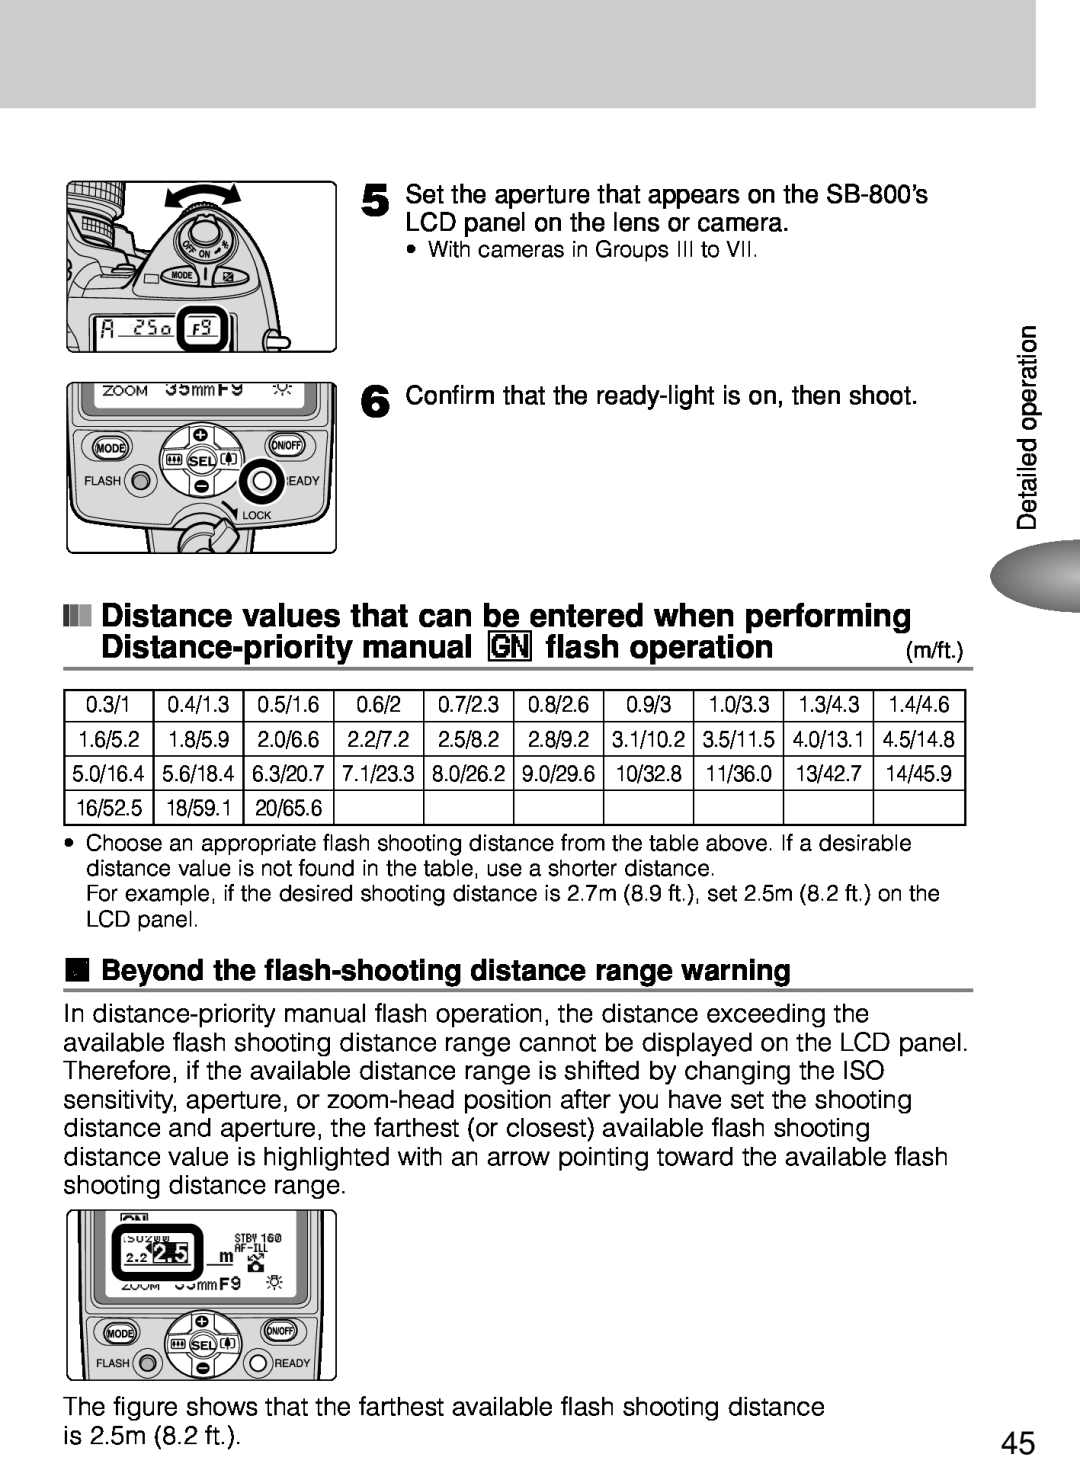 Nikon SB-800 Distance values that can be entered when performing, Distance-priority manual p flash operation 